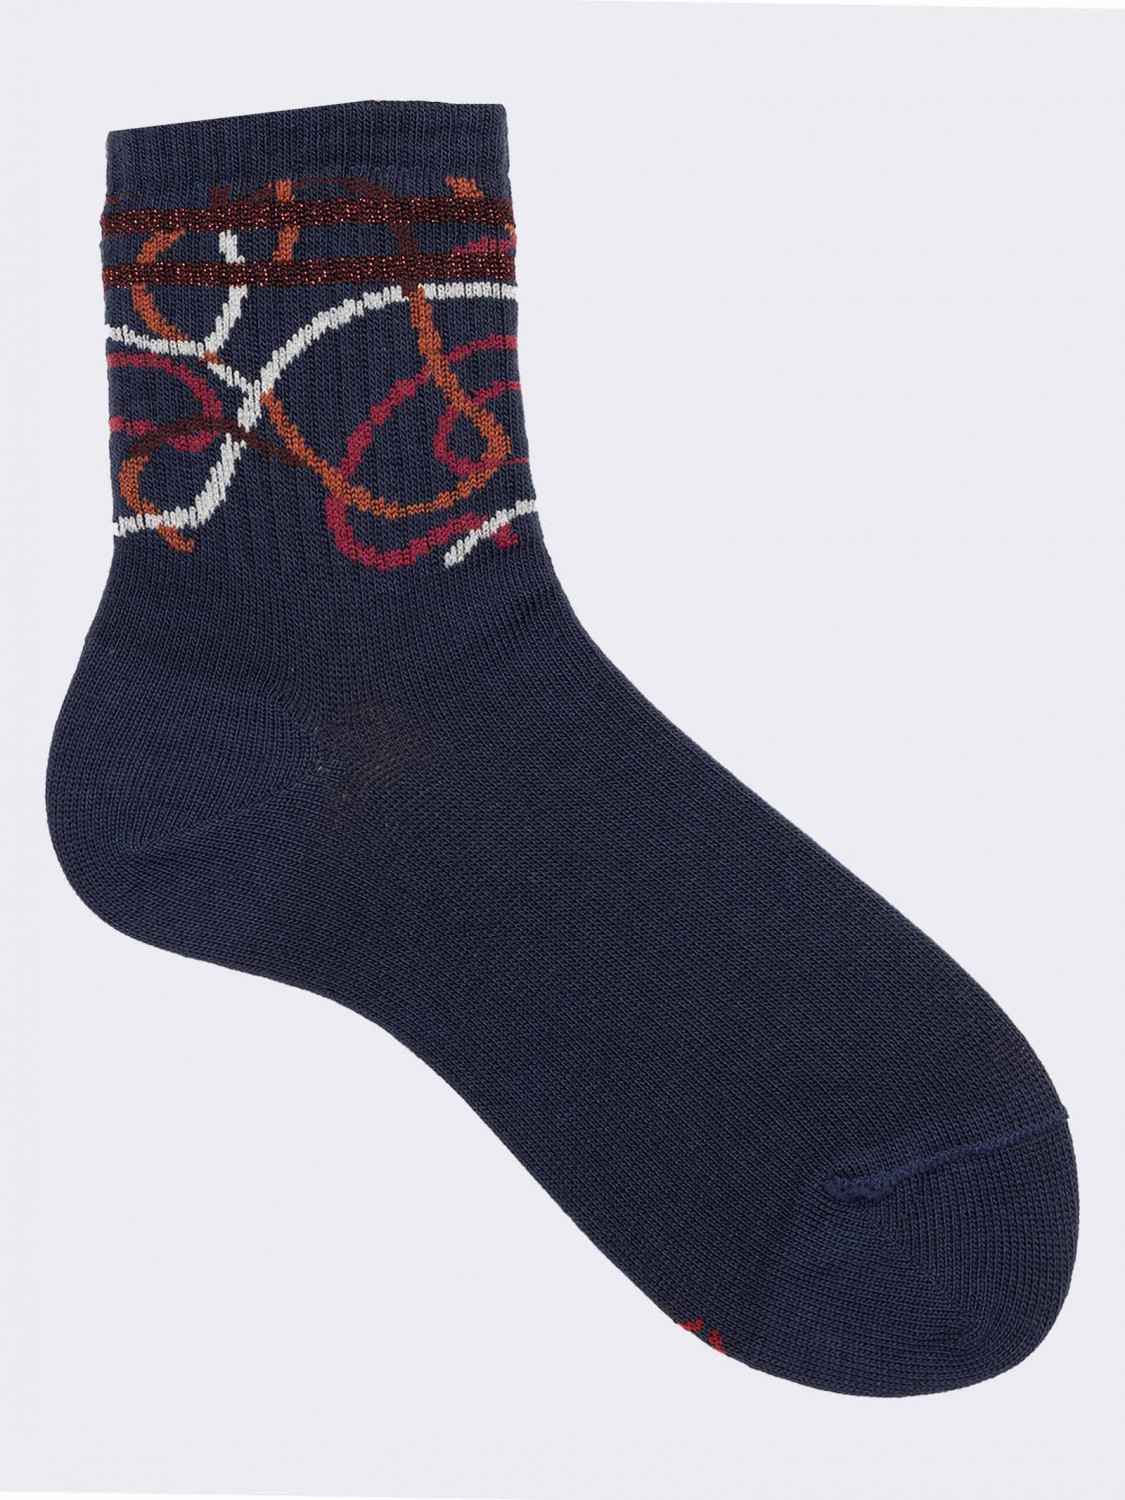 Girl's crew socks abstract patterned  in warm cotton